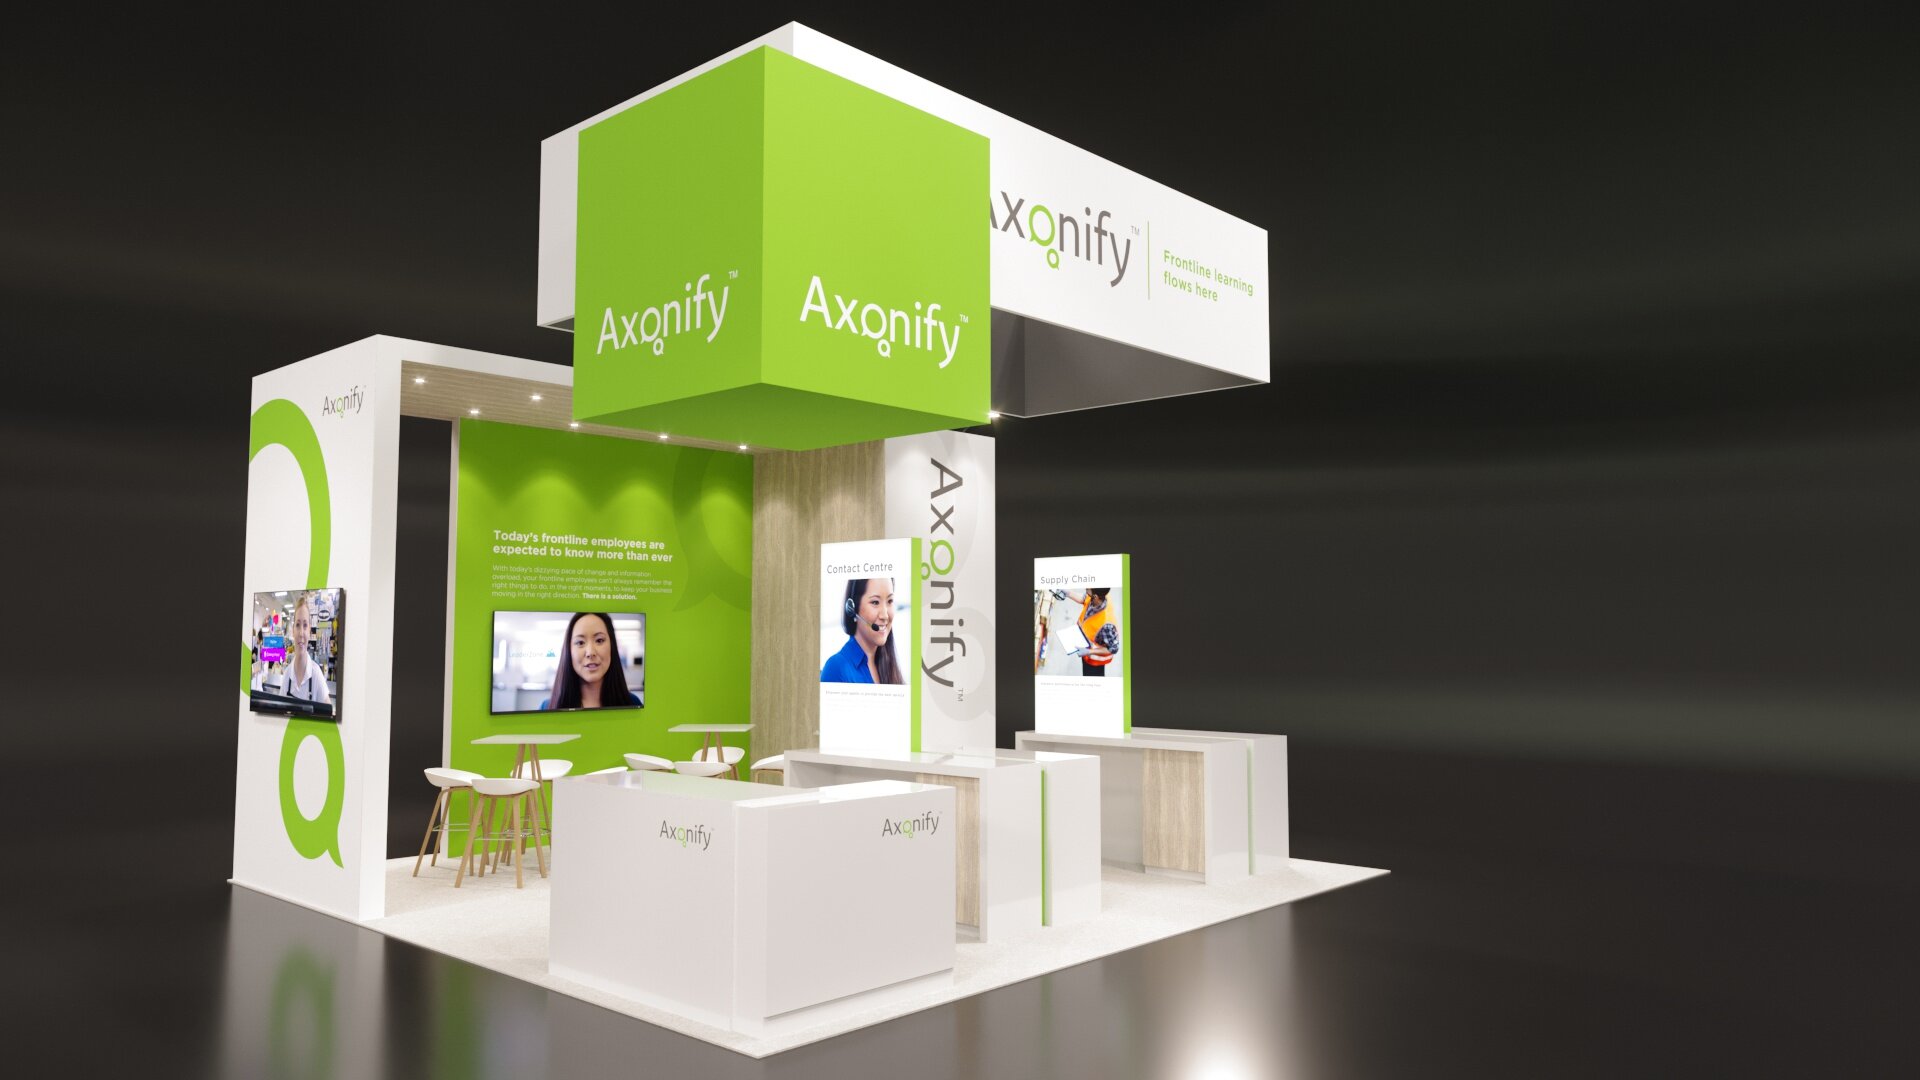 Axonify_ATD Trade Show_20'x20'_Exhibit Booth (6).jpg